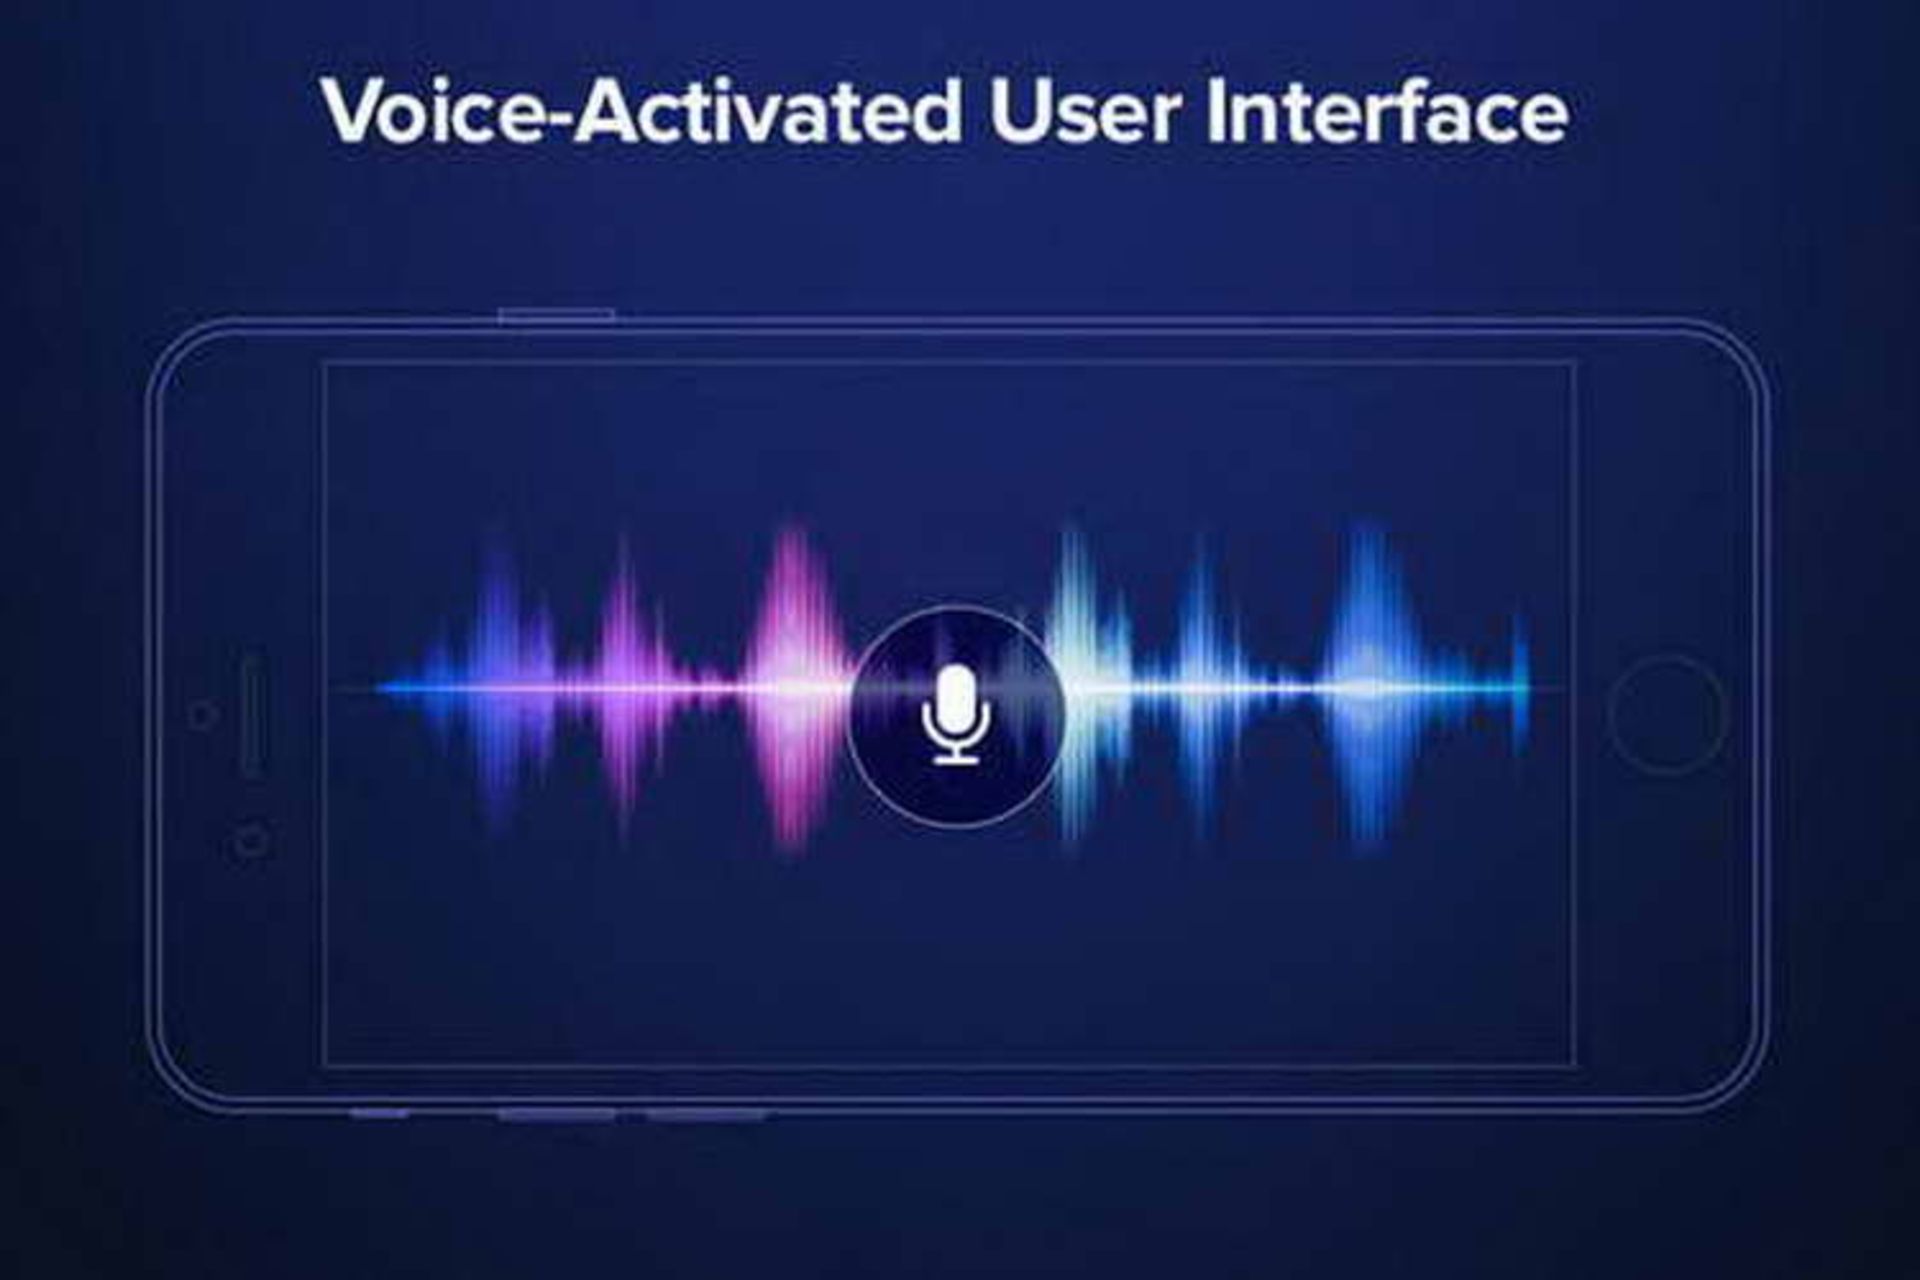 Voice-Activated User Interface